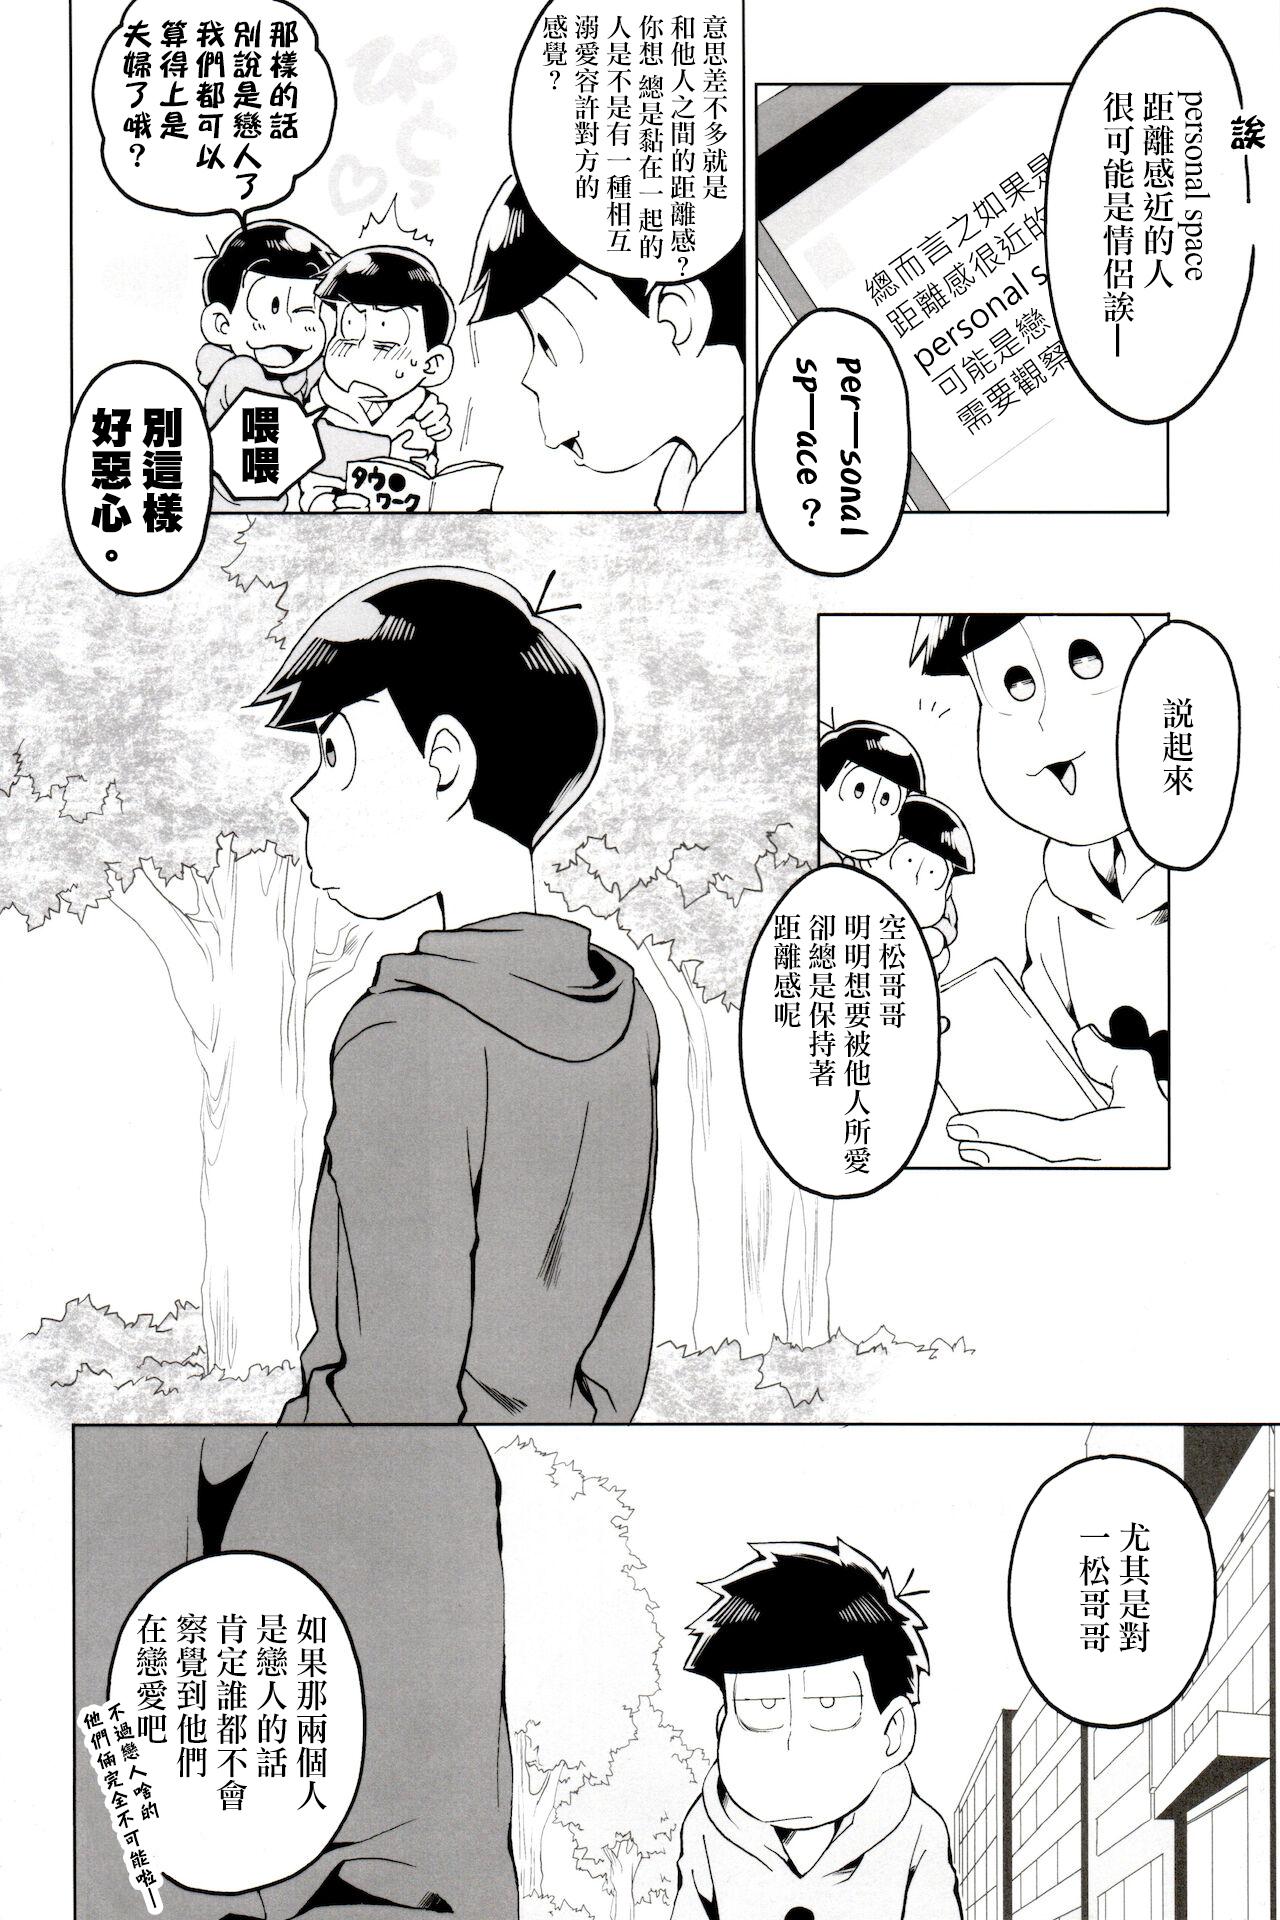 Pussy Fingering personal space - Osomatsu san Big - Page 6